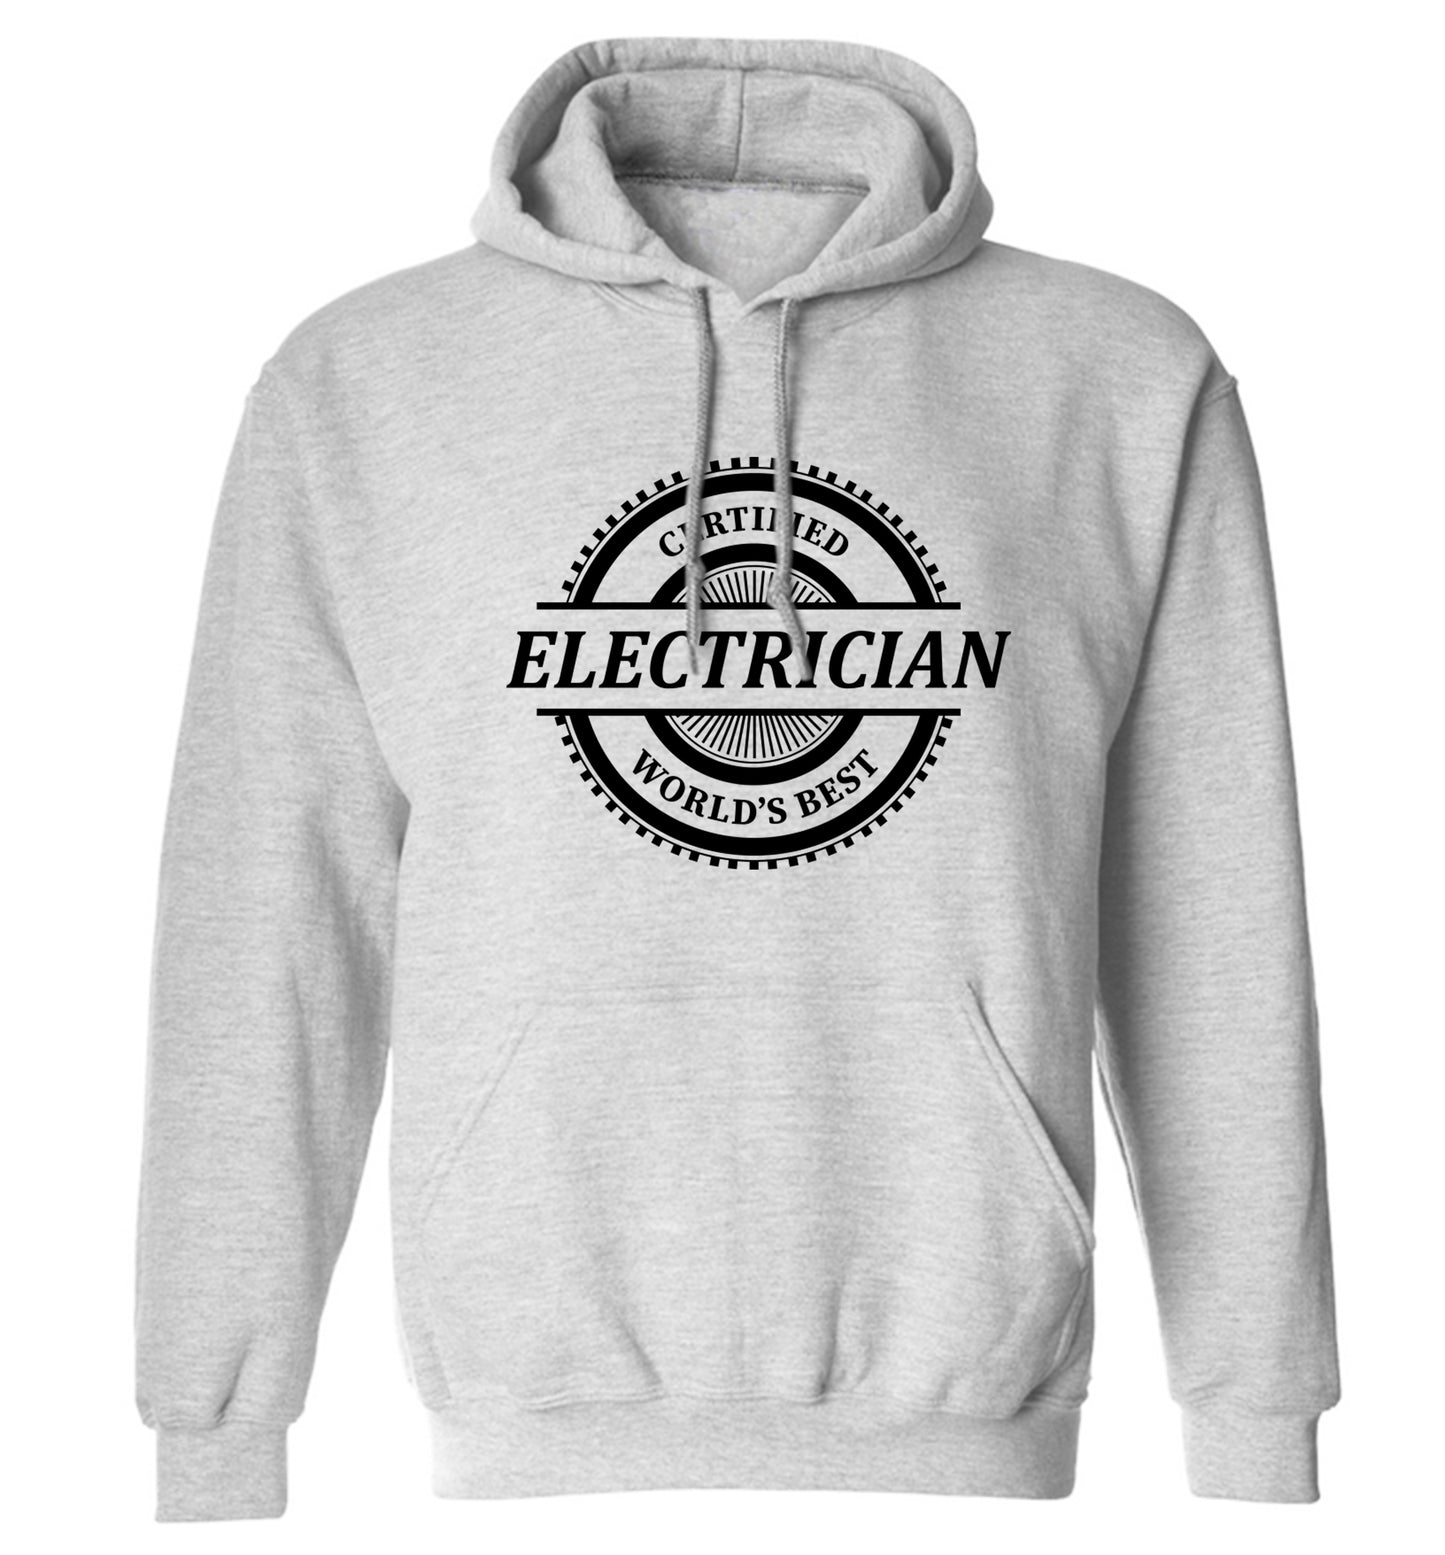 Worlds greatest electrician adults unisex grey hoodie 2XL